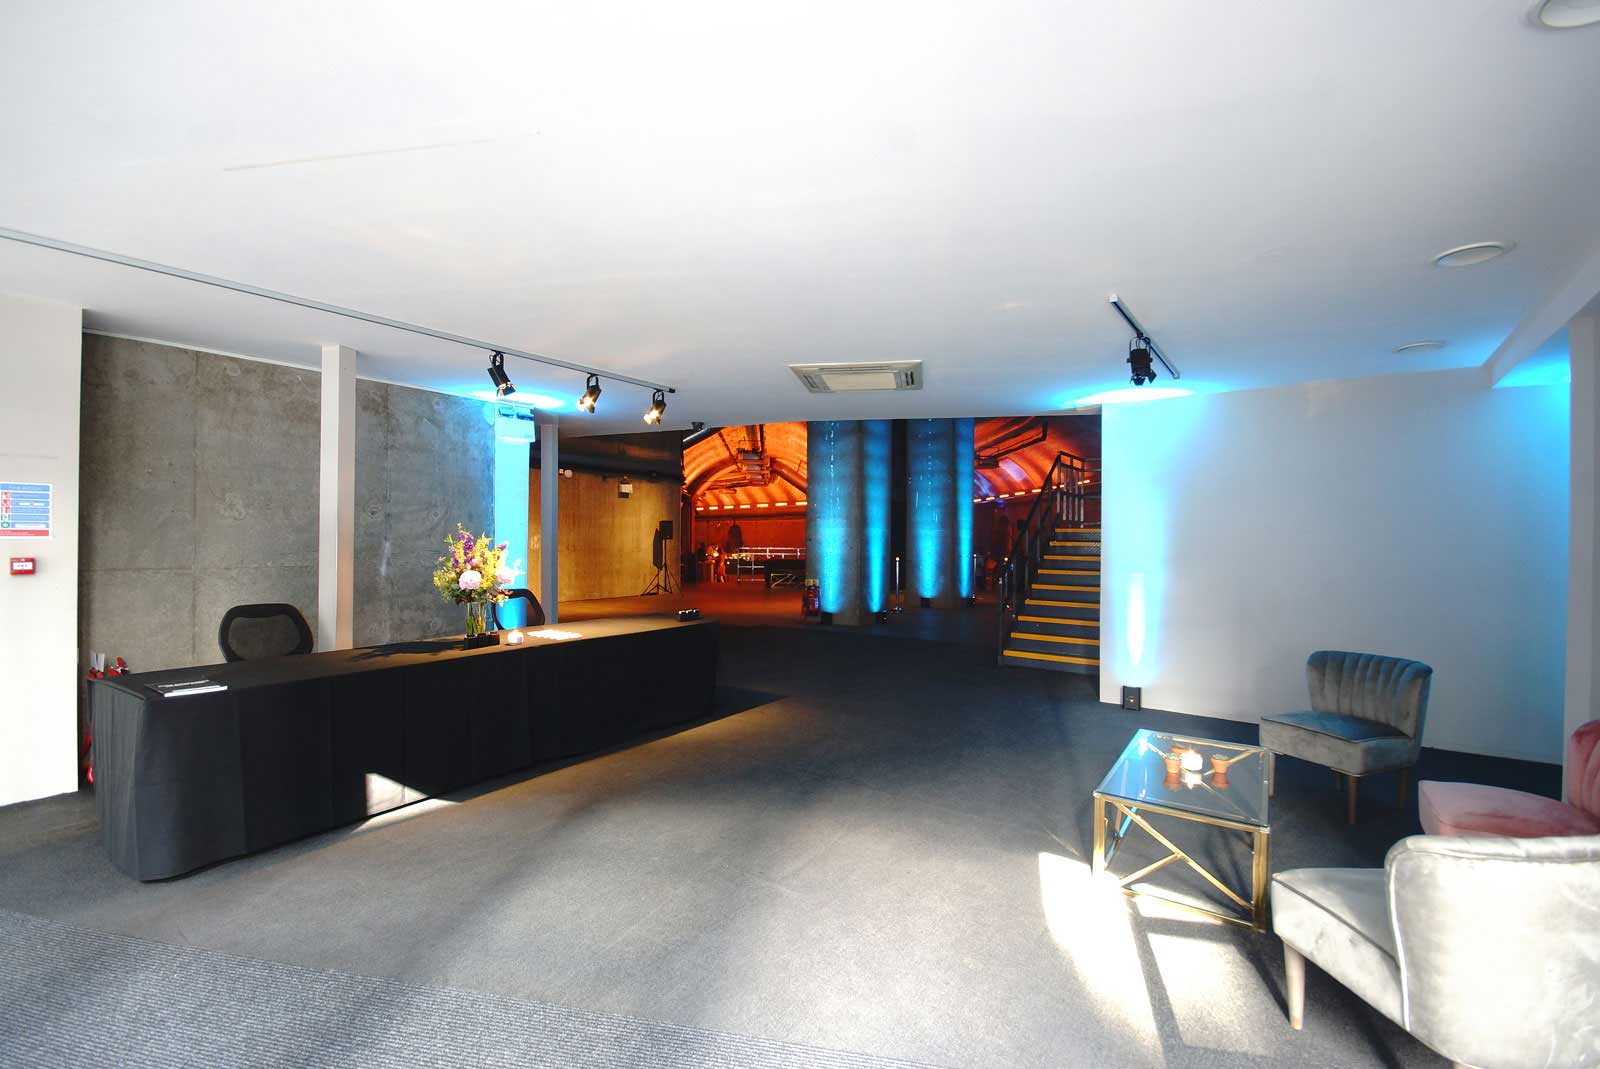 Guest entrsnce at the Central London event space the London South Bank Event Venue represented by VenuesLDN.co.uk